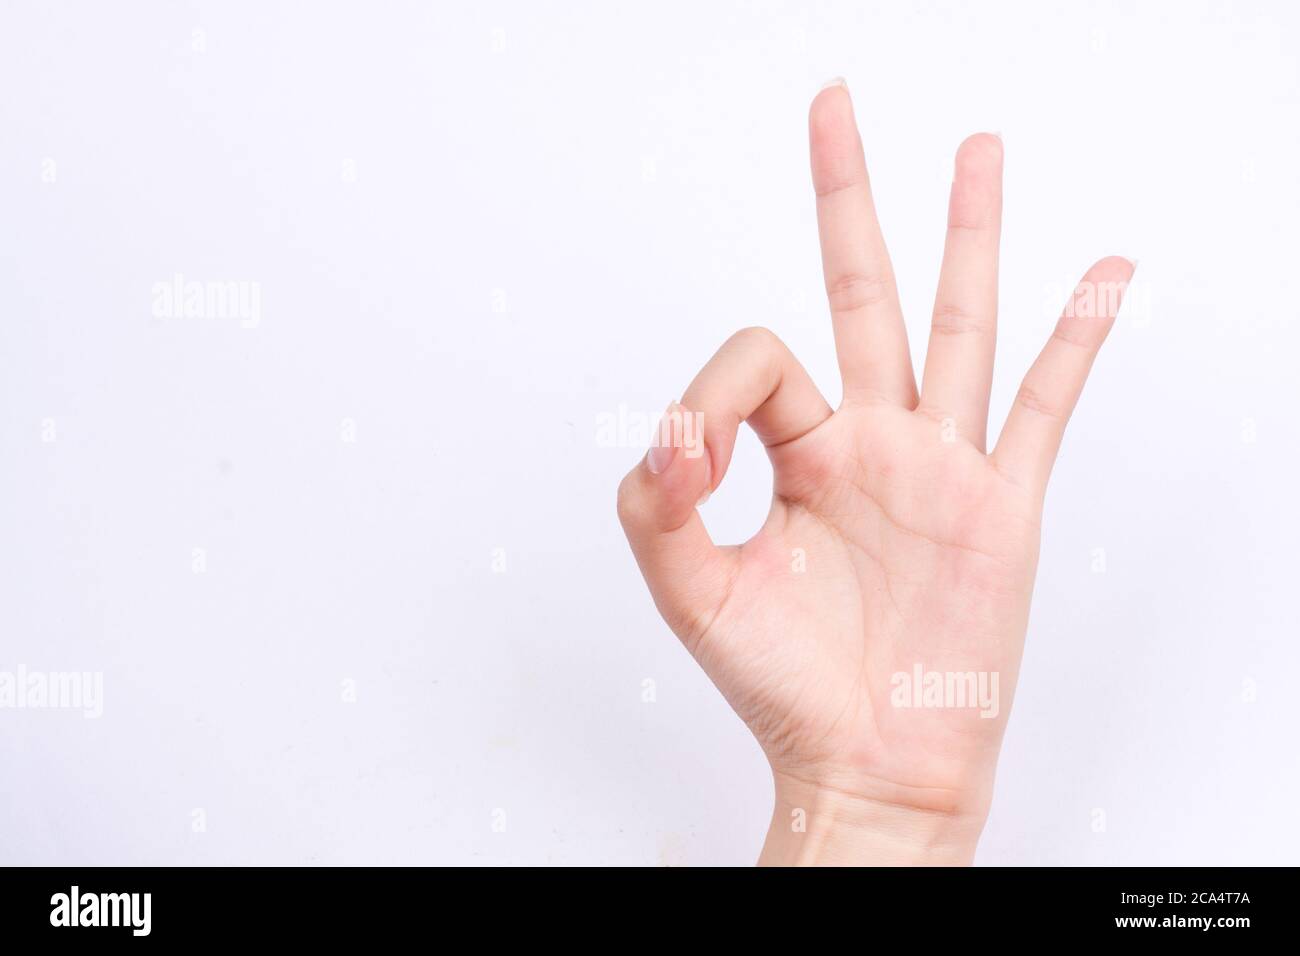 finger hand symbols isolated the concept hand gesturing sign ok okay agree on white background Stock Photo